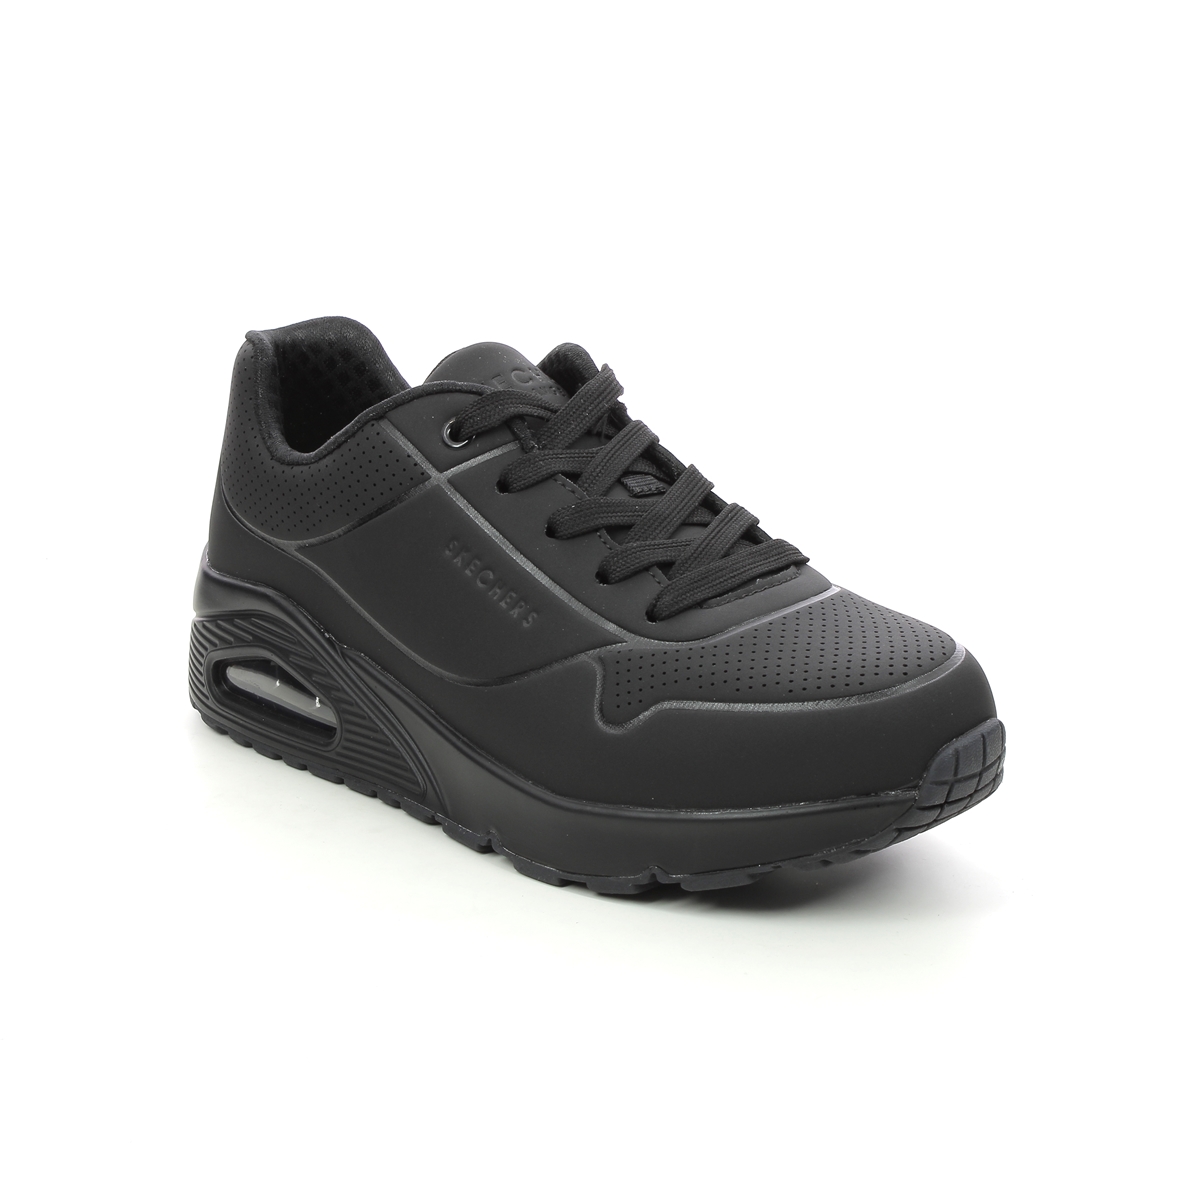 Skechers Uno Stand Air Jnr Black Kids Trainers 403674L In Size 35 In Plain Black For kids